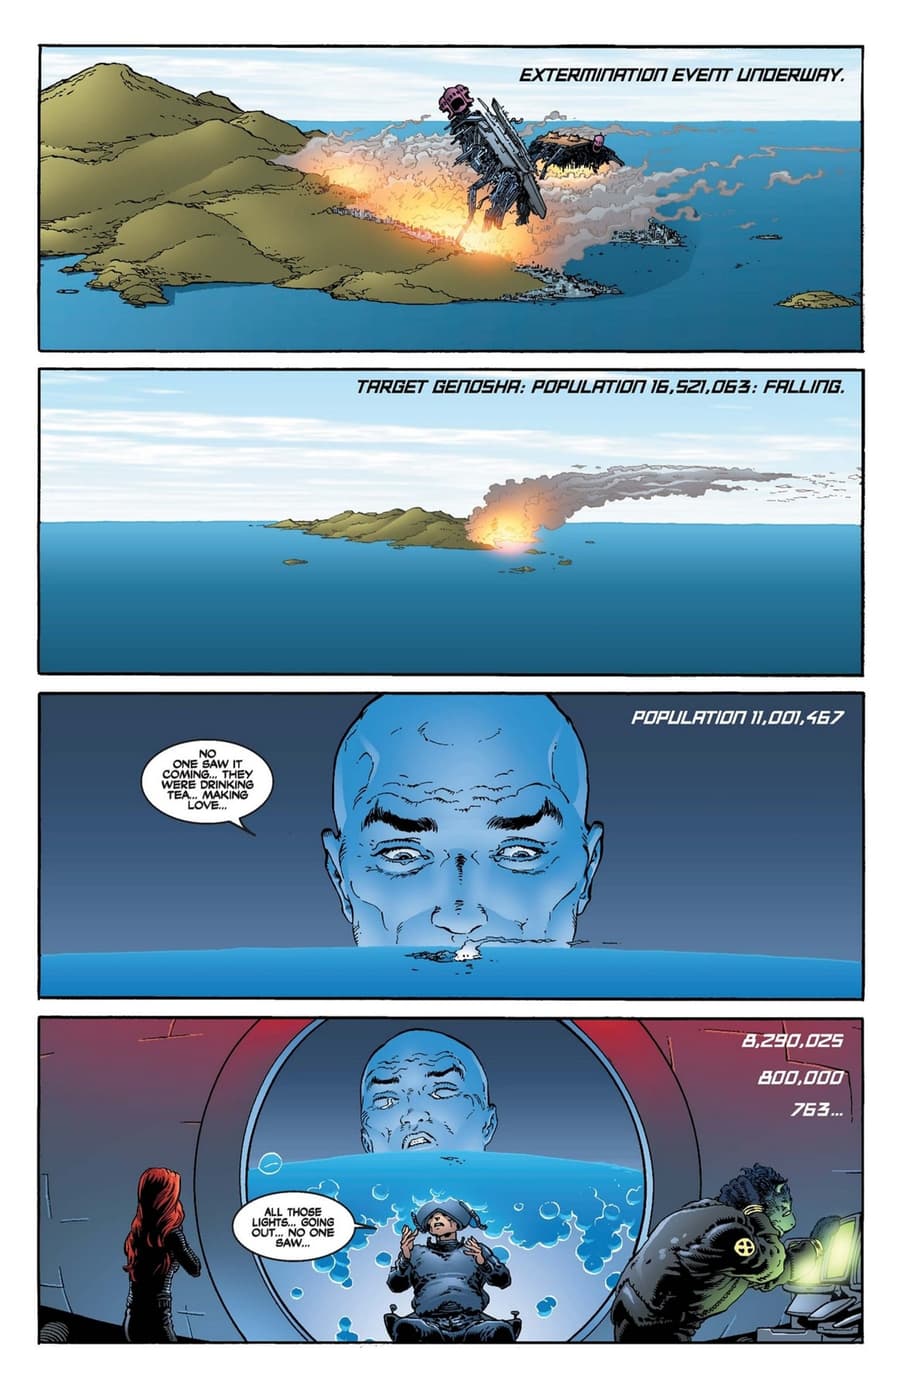 NEW X-MEN (2001) #115 page by Grant Morrison and Frank Quitely